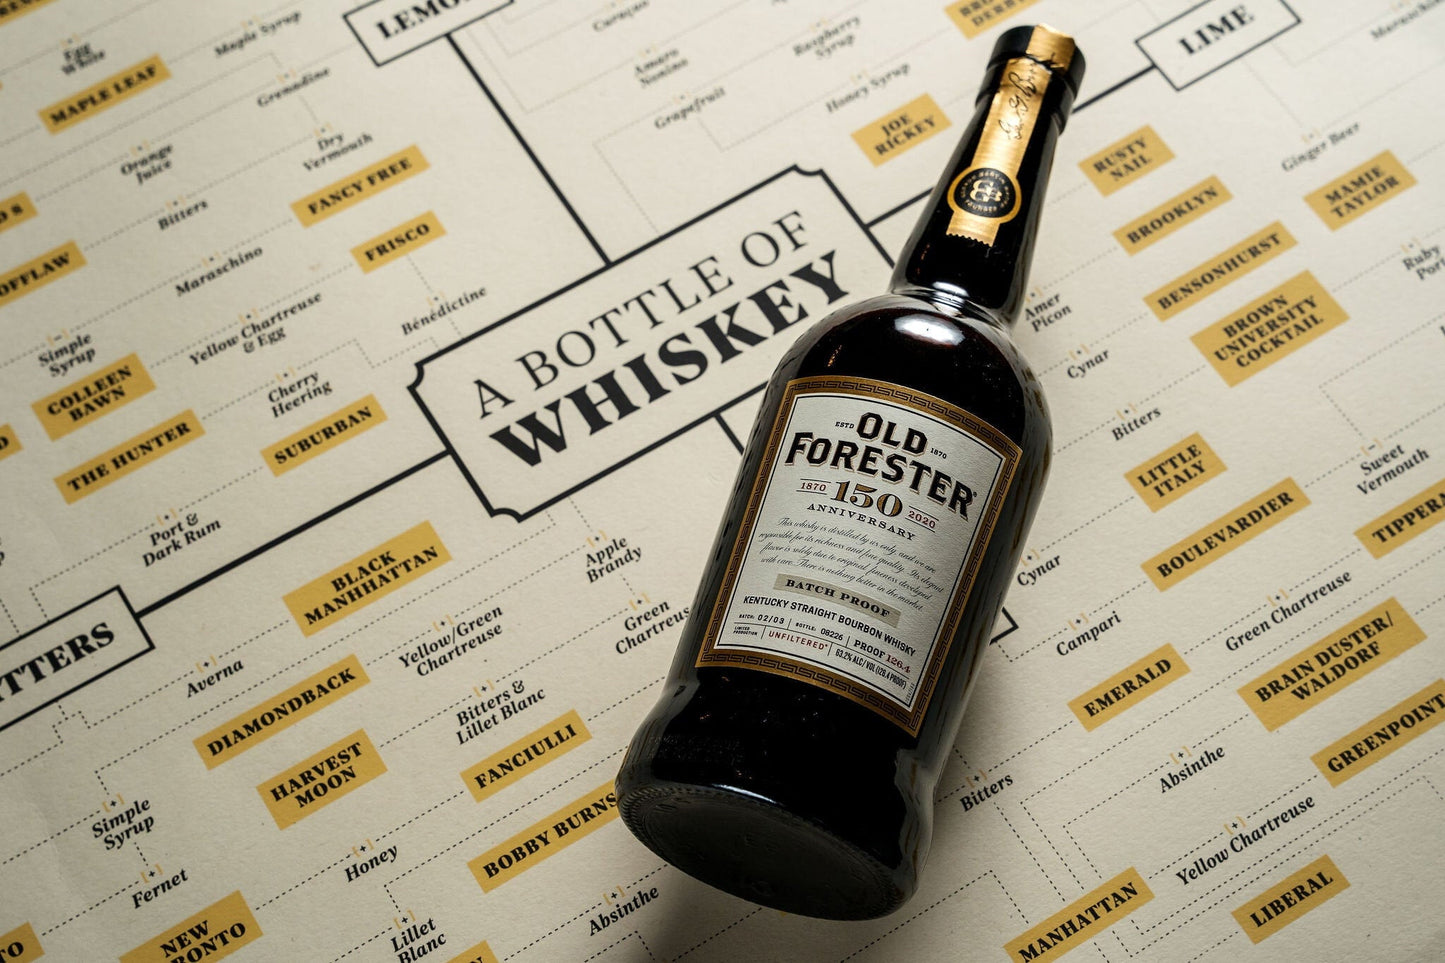 A Bottle of Whiskey Poster